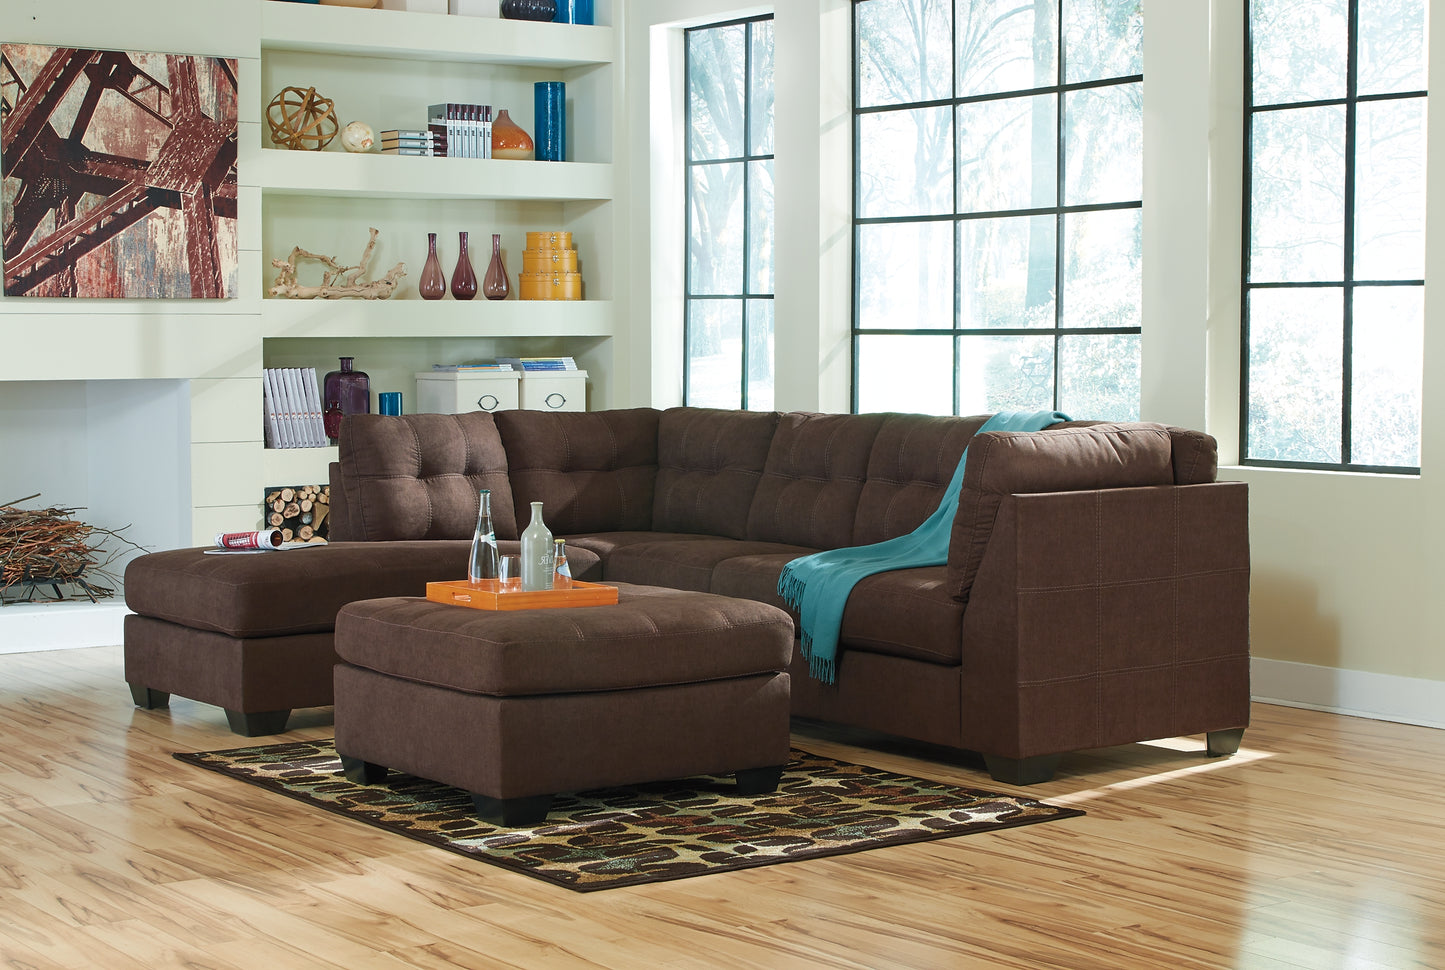 Maier 2-Piece Sectional with Ottoman Benchcraft®